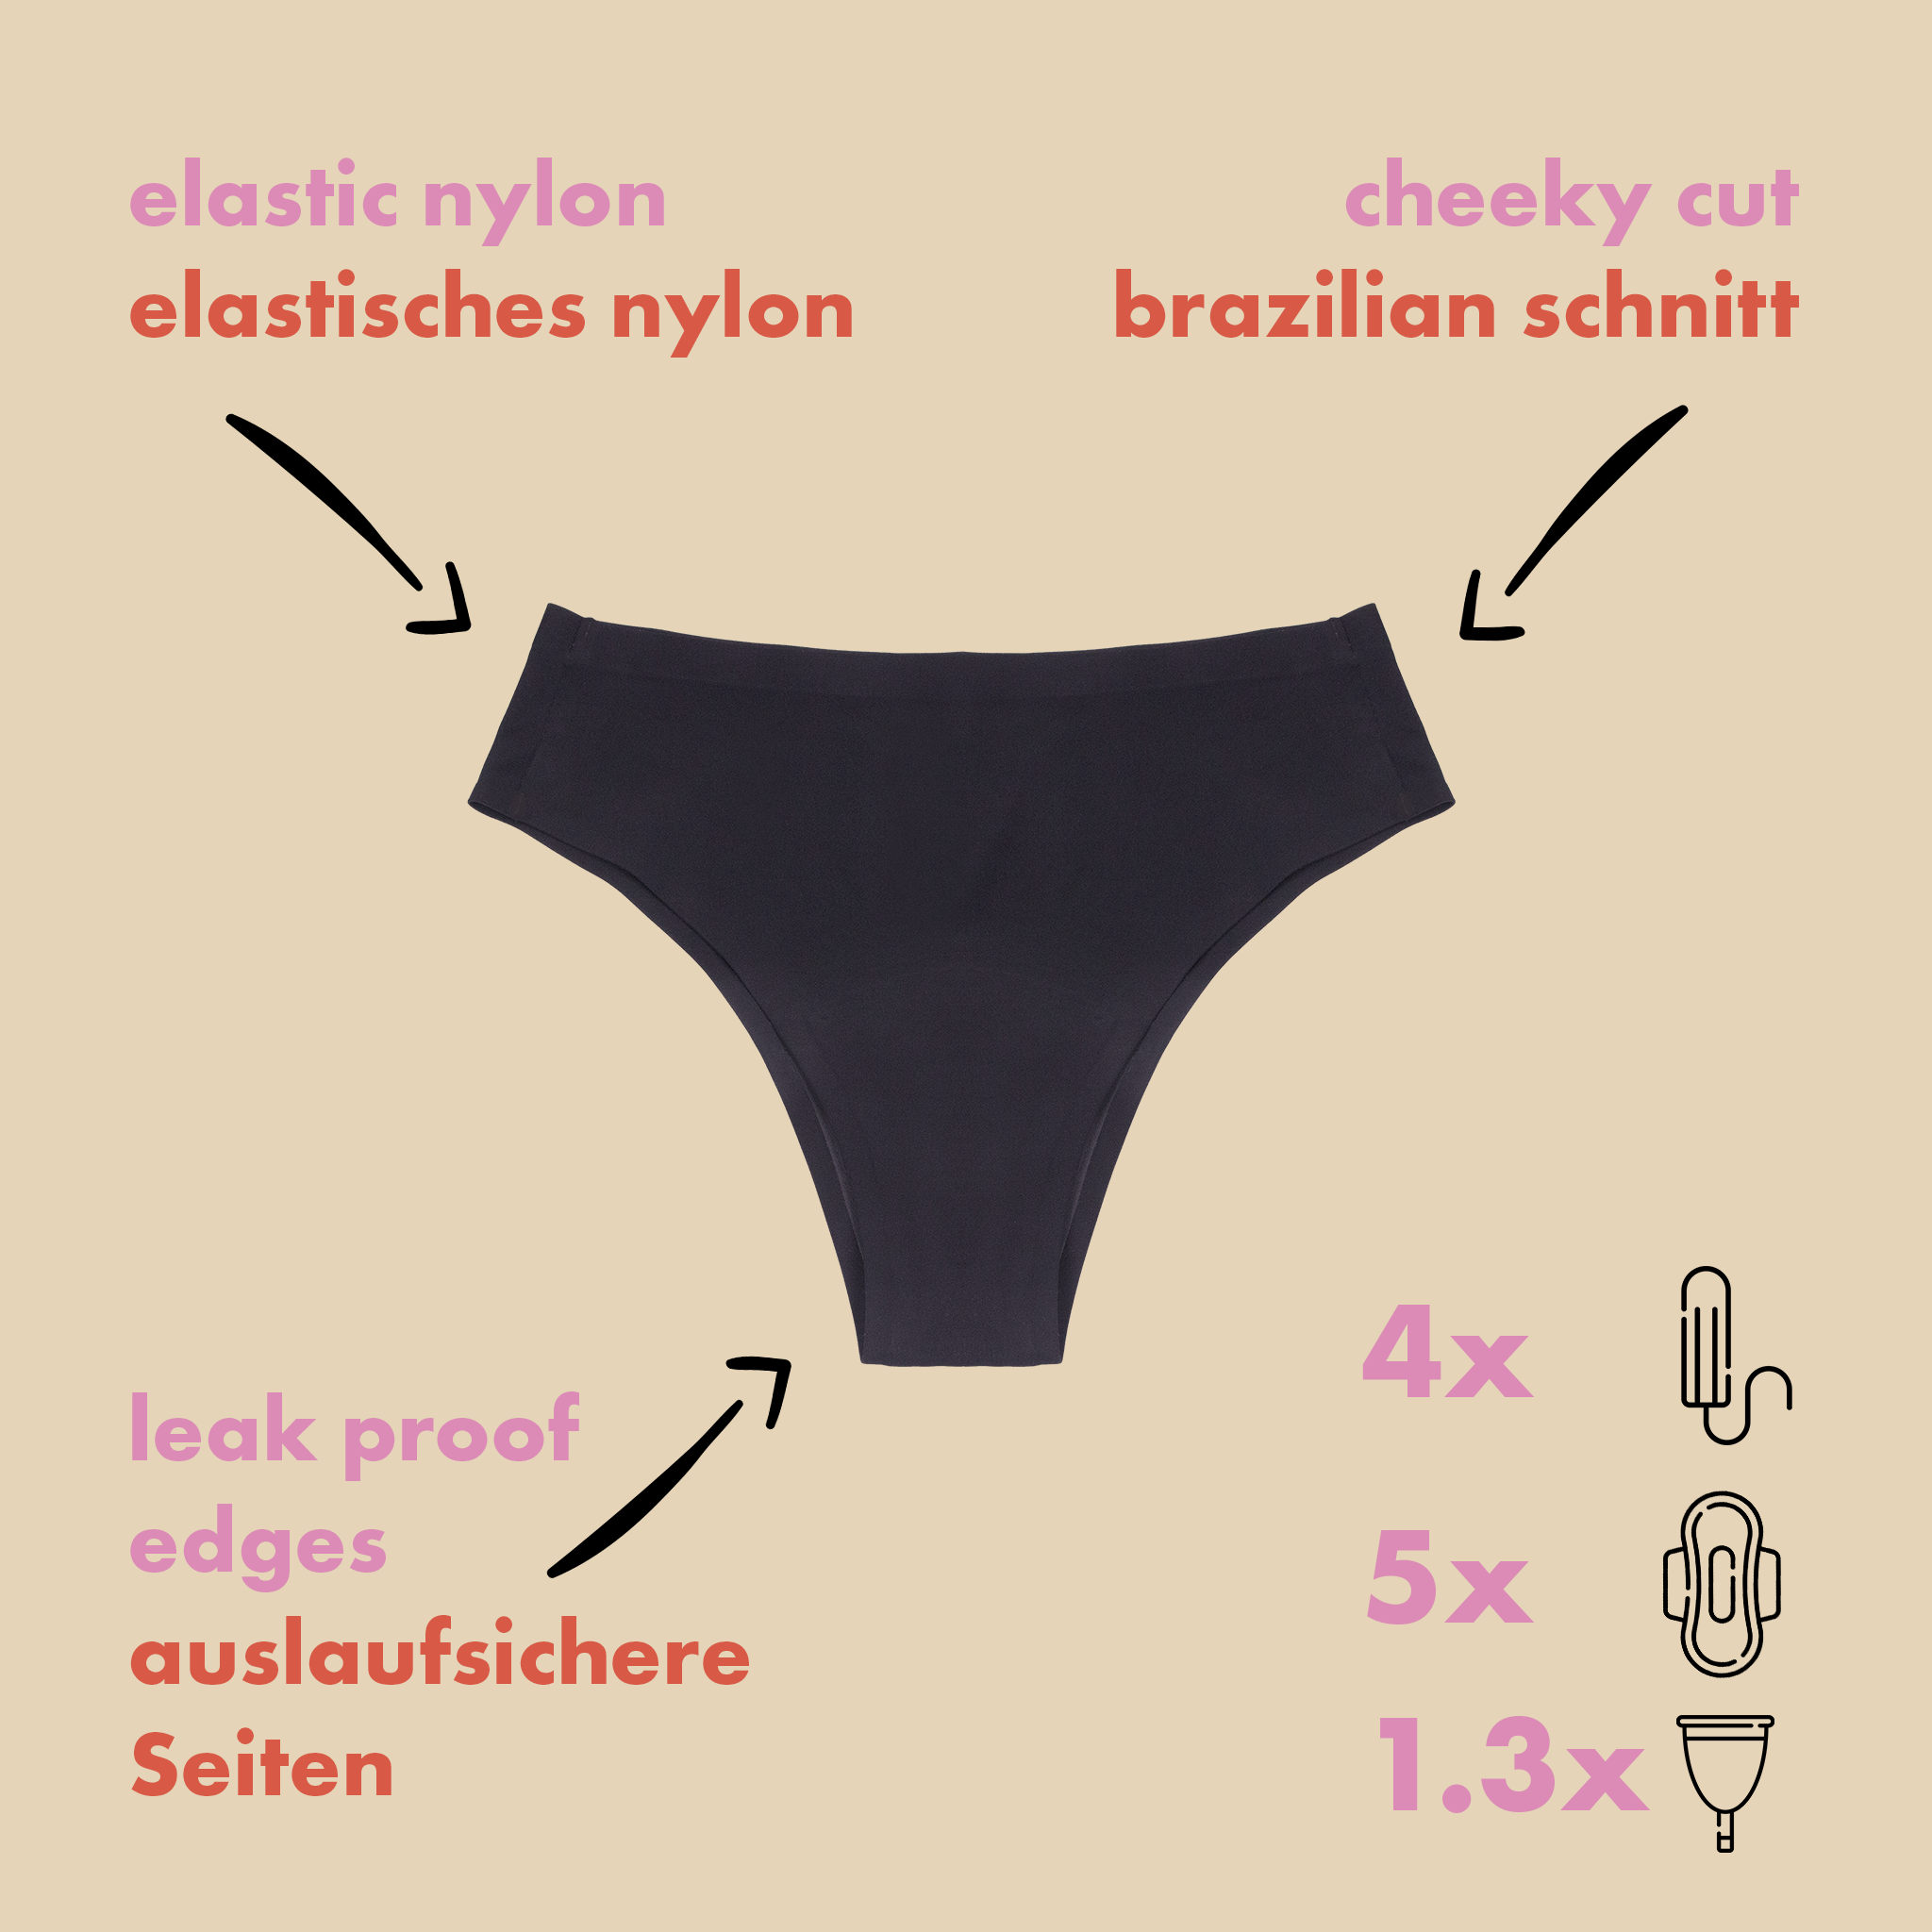 dais period underwear in cheeky cut in black showing the product benefits of elastic nylon, cheeky cut, leak proof edges and super absorbency of up to 4 tampons.